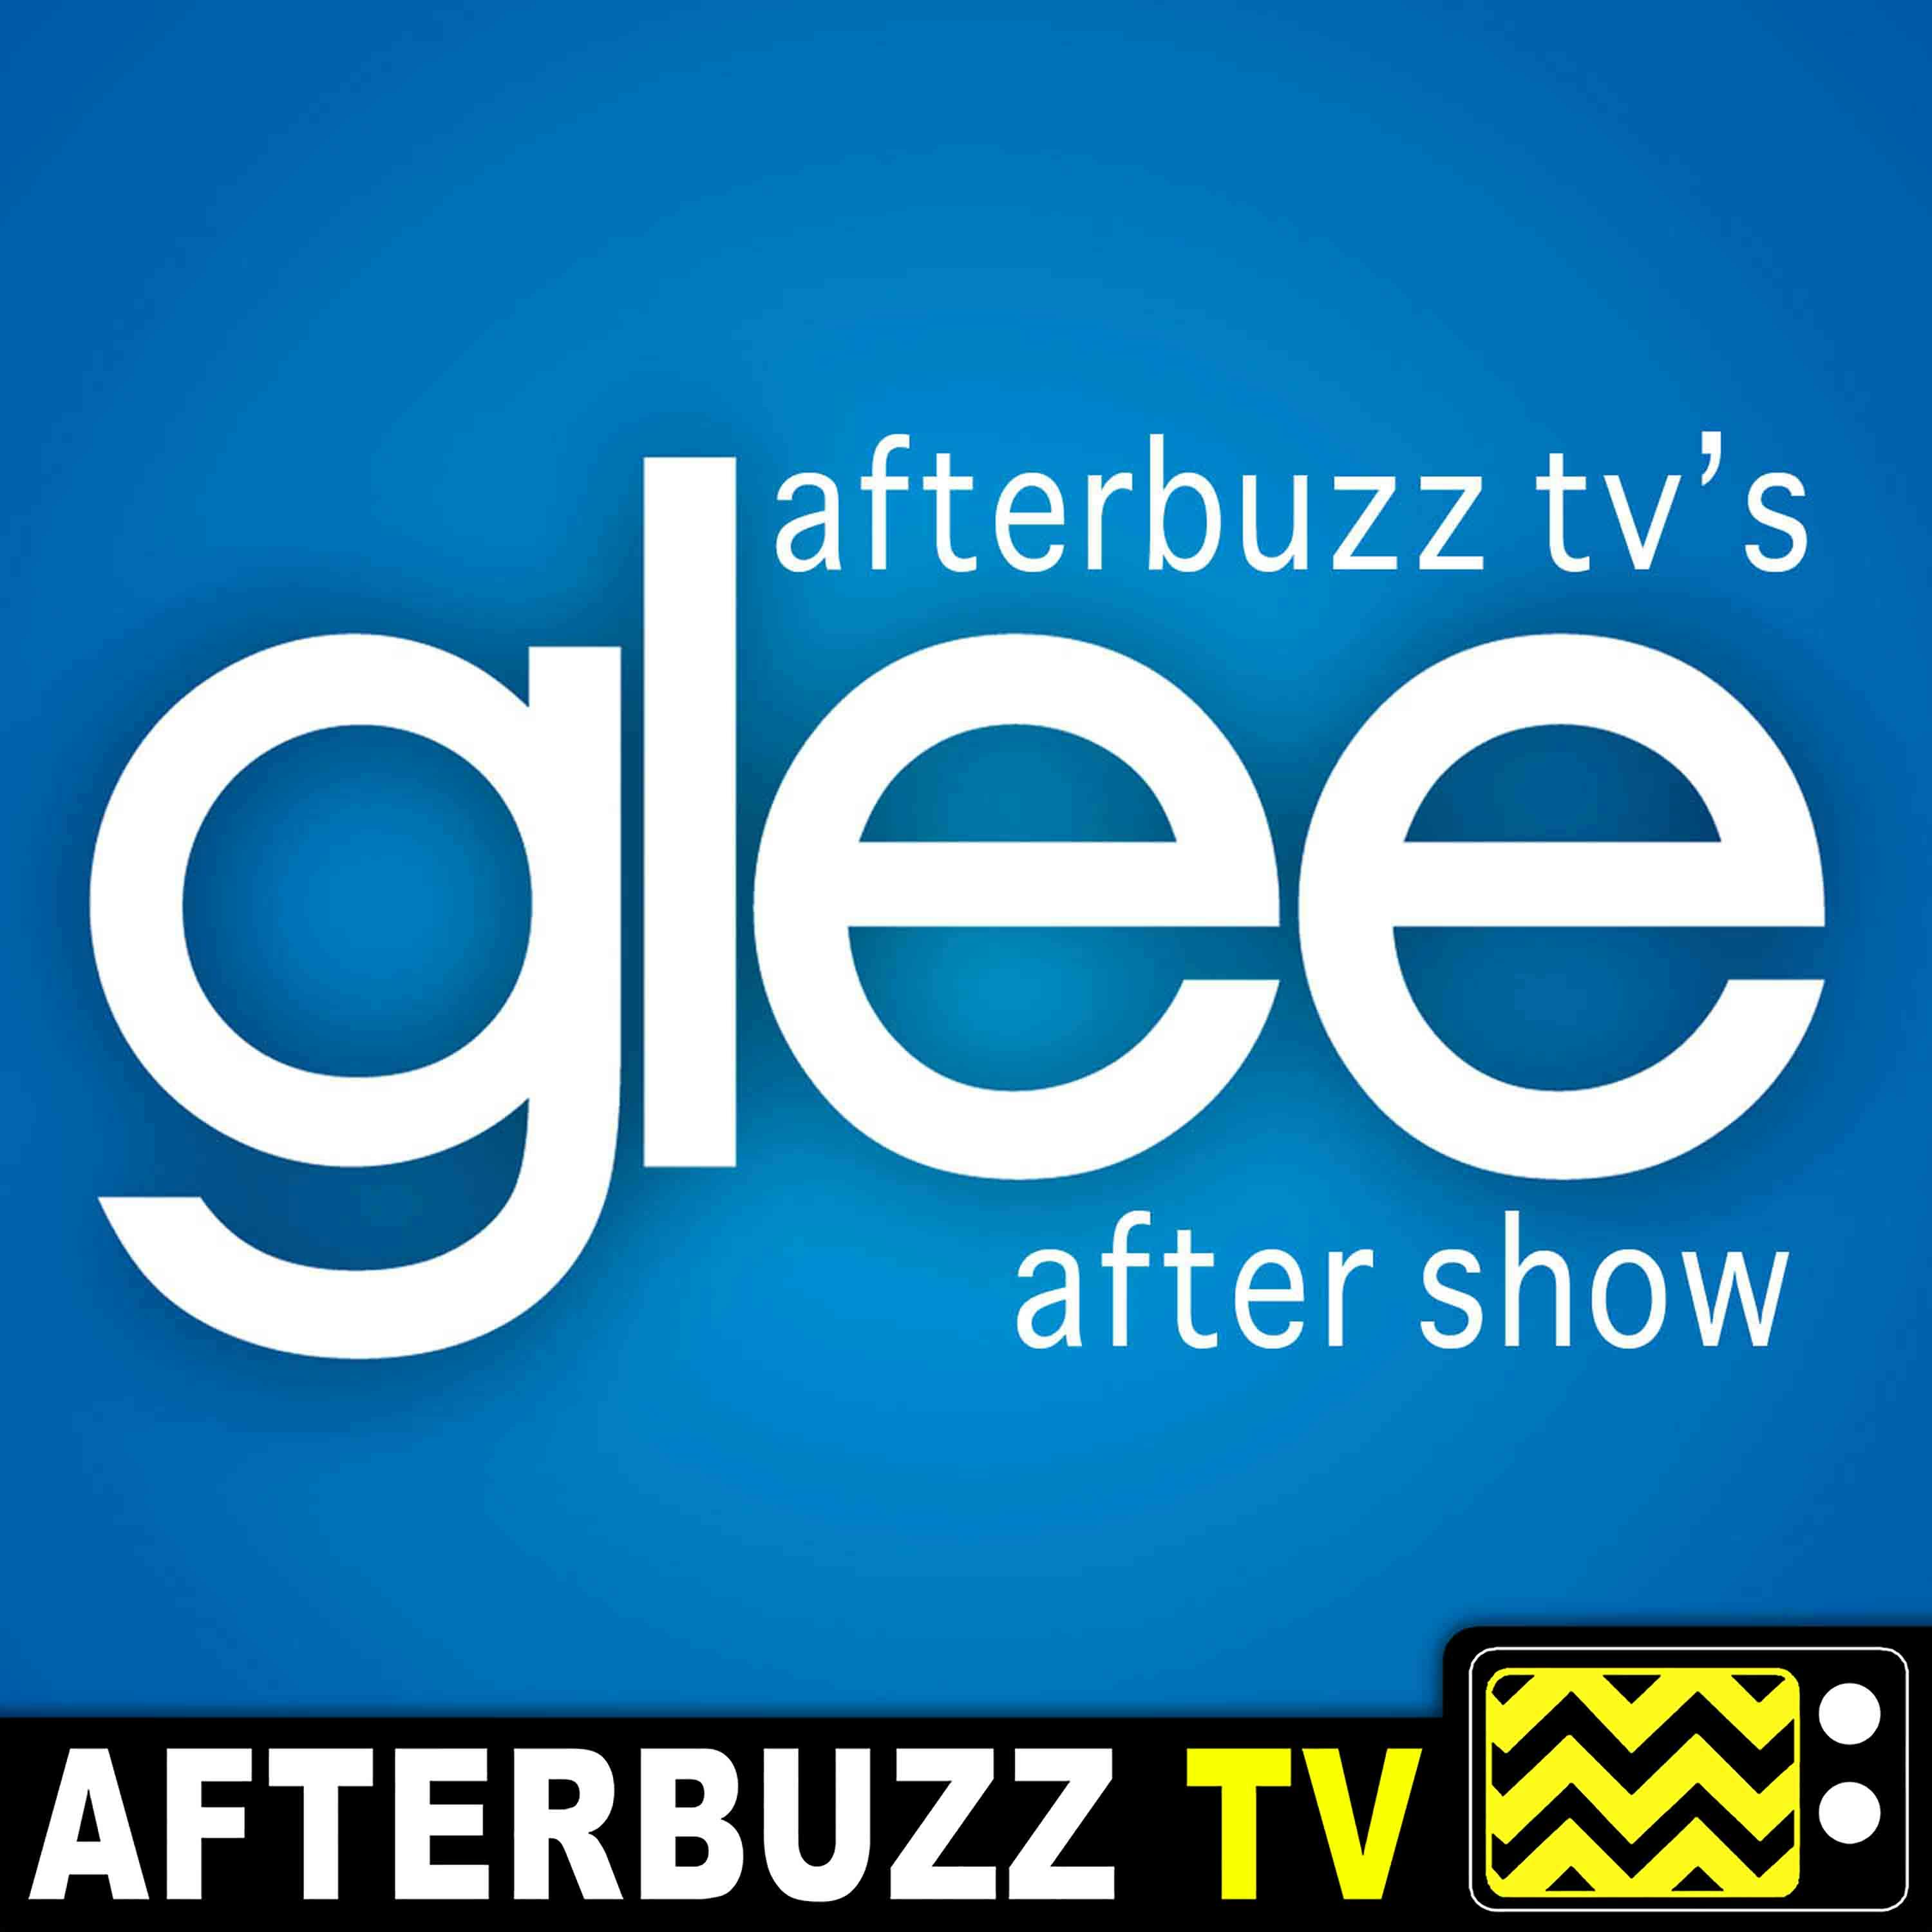 Glee S:6 | What The World Needs Now E:6 | AfterBuzz TV AfterShow